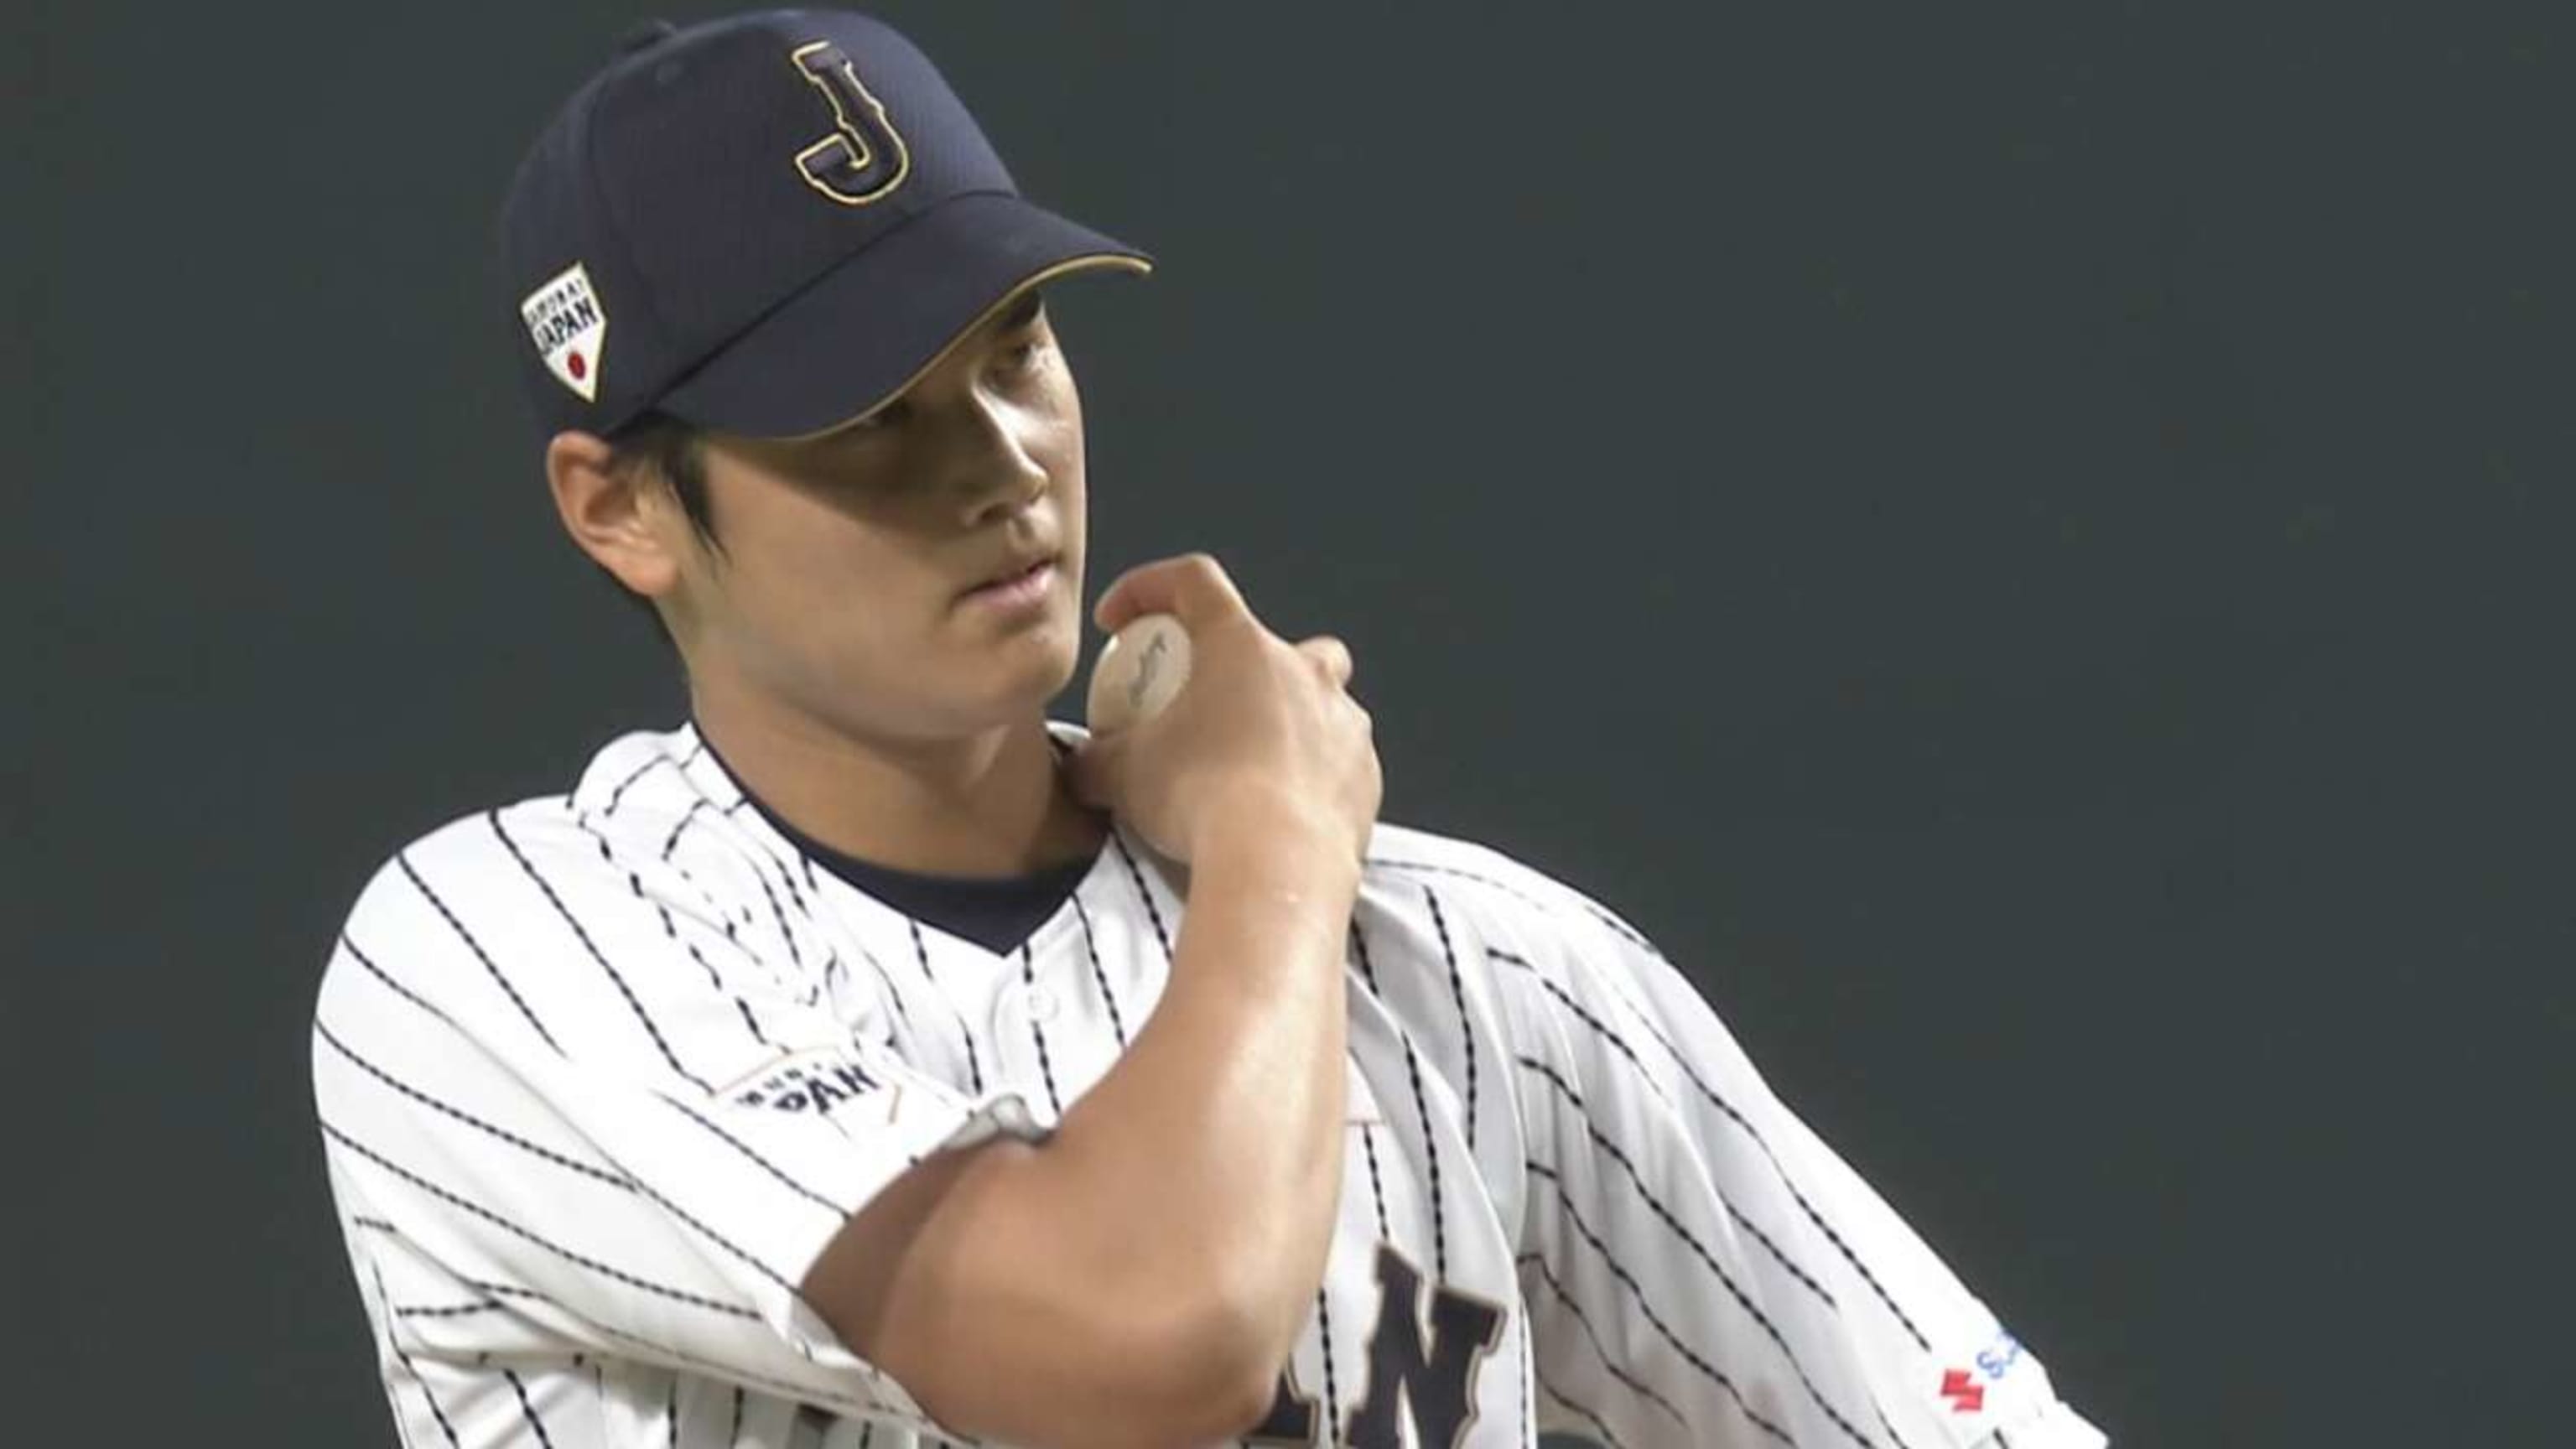 Is it Otani or Ohtani? Agent clarifies spelling of Japanese two